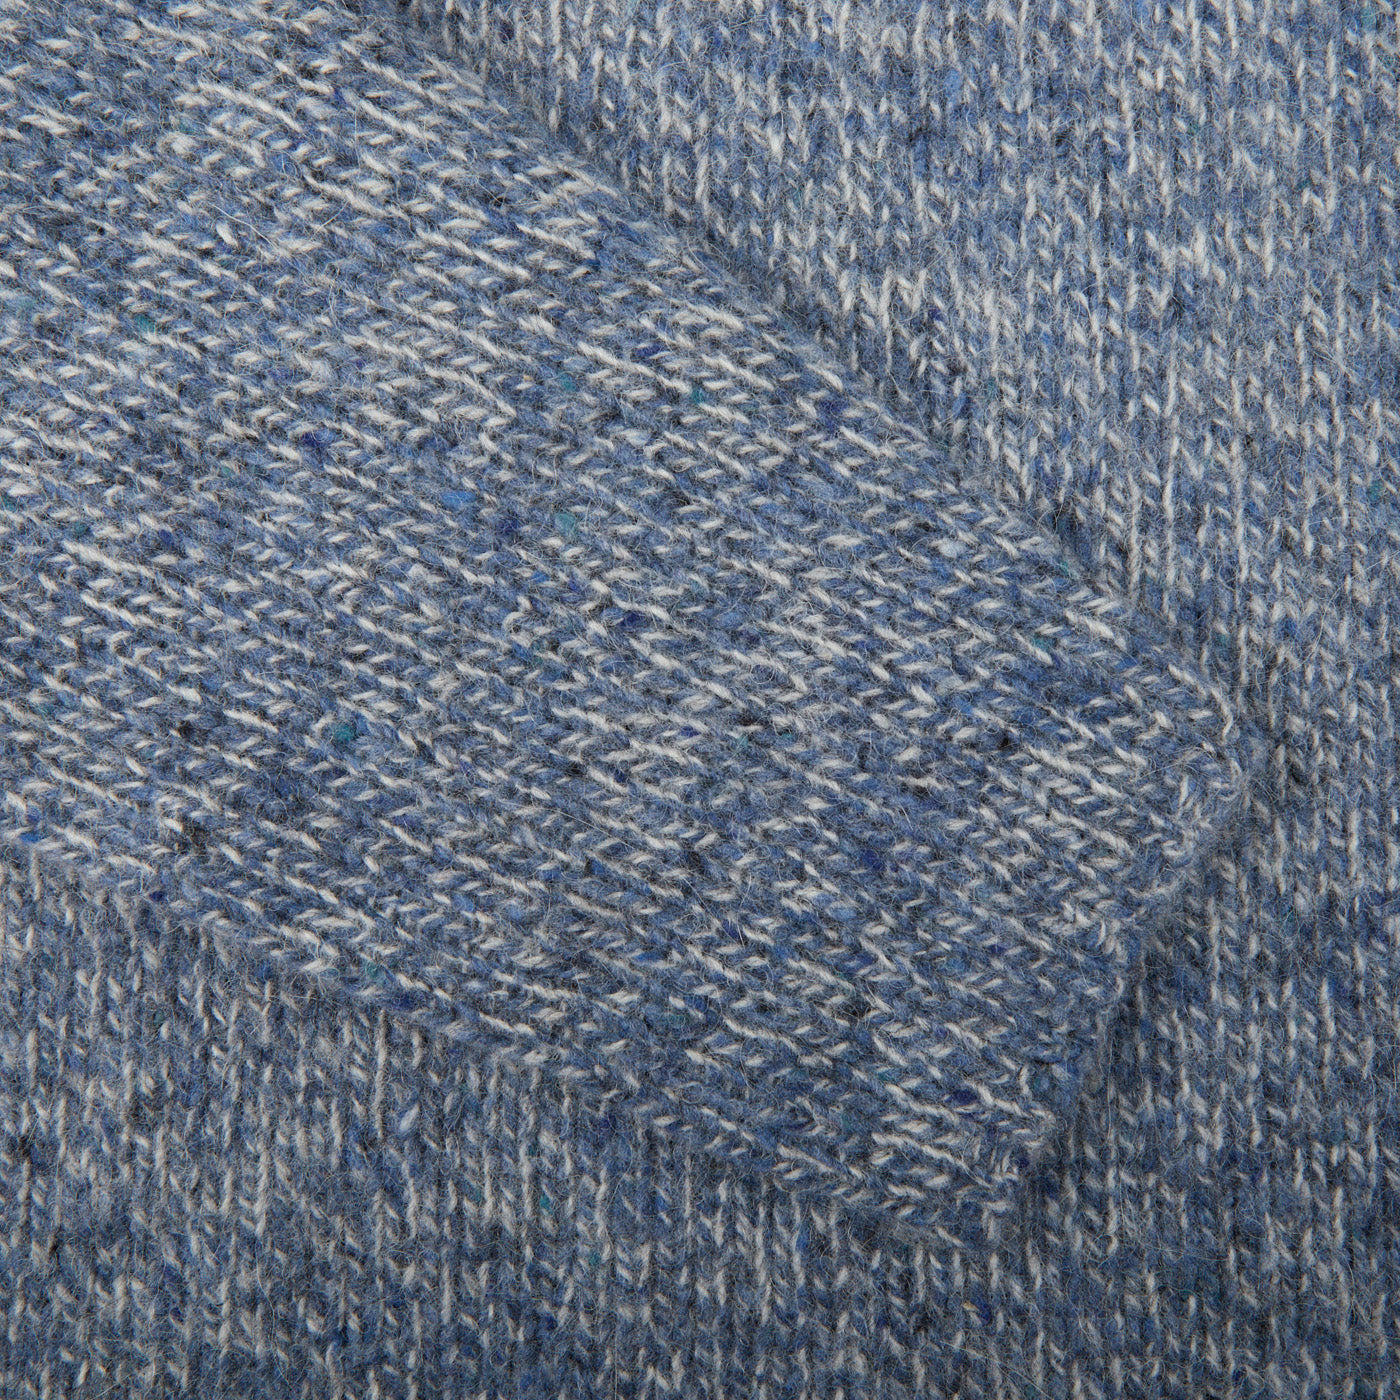 A close up of an Alan Paine Blue Spreckle Wool Alpaca Tweed Roll Neck sweater with a roll-neck.